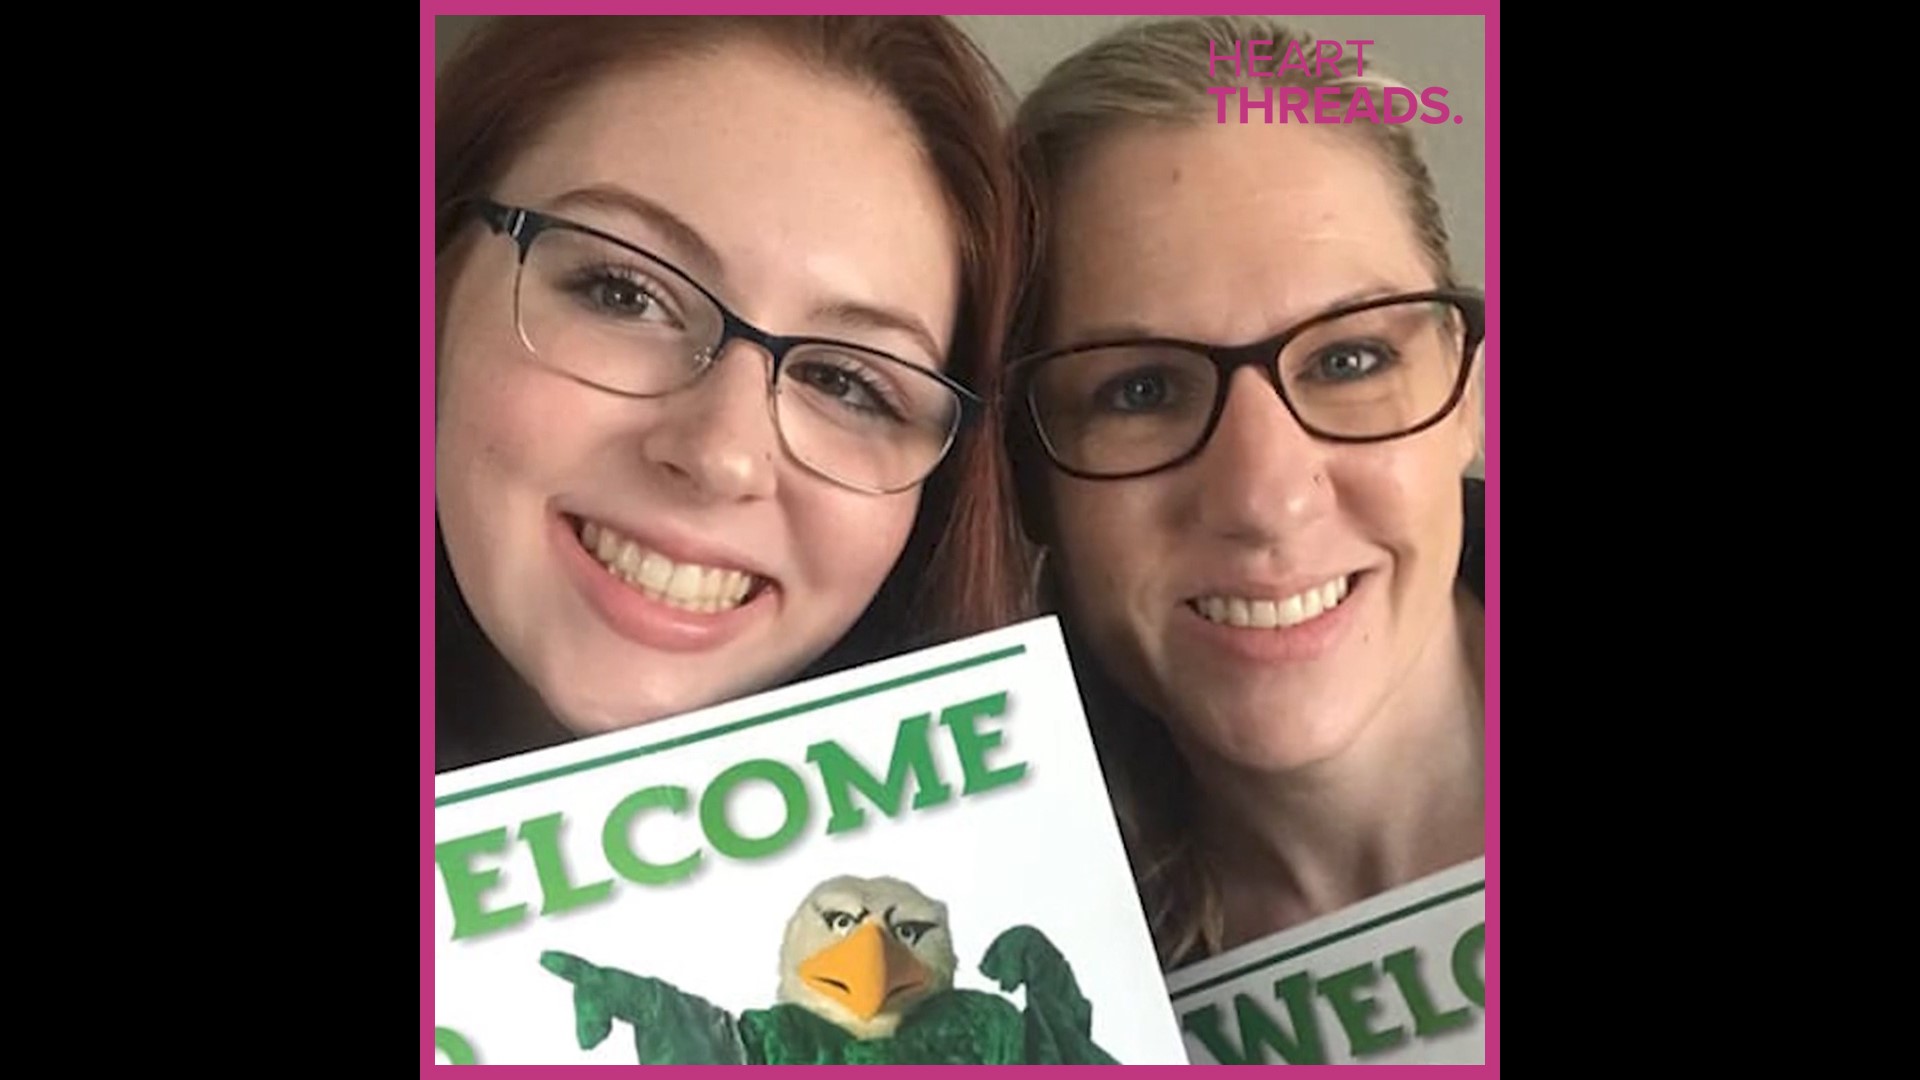 Emma is 16 and already in college. Her mom Kathy went back to school after 14 years as a homemaker. Now they're studying to be doctors together.